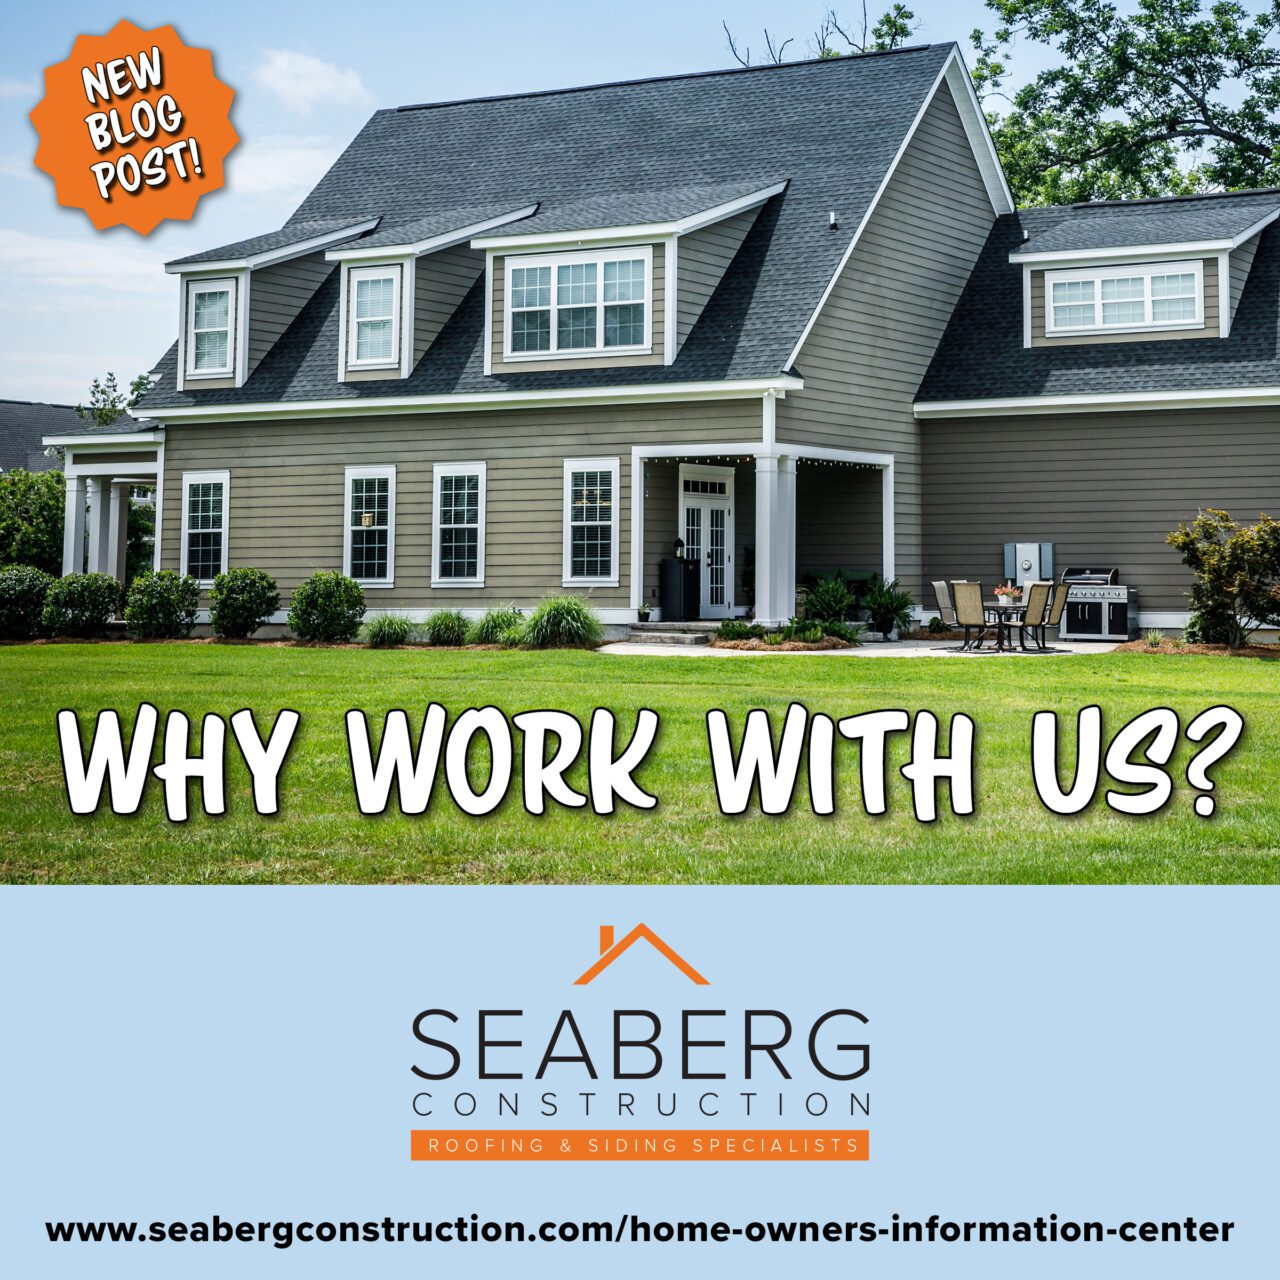 Seaberg Construction Blog: Why Work With Us?